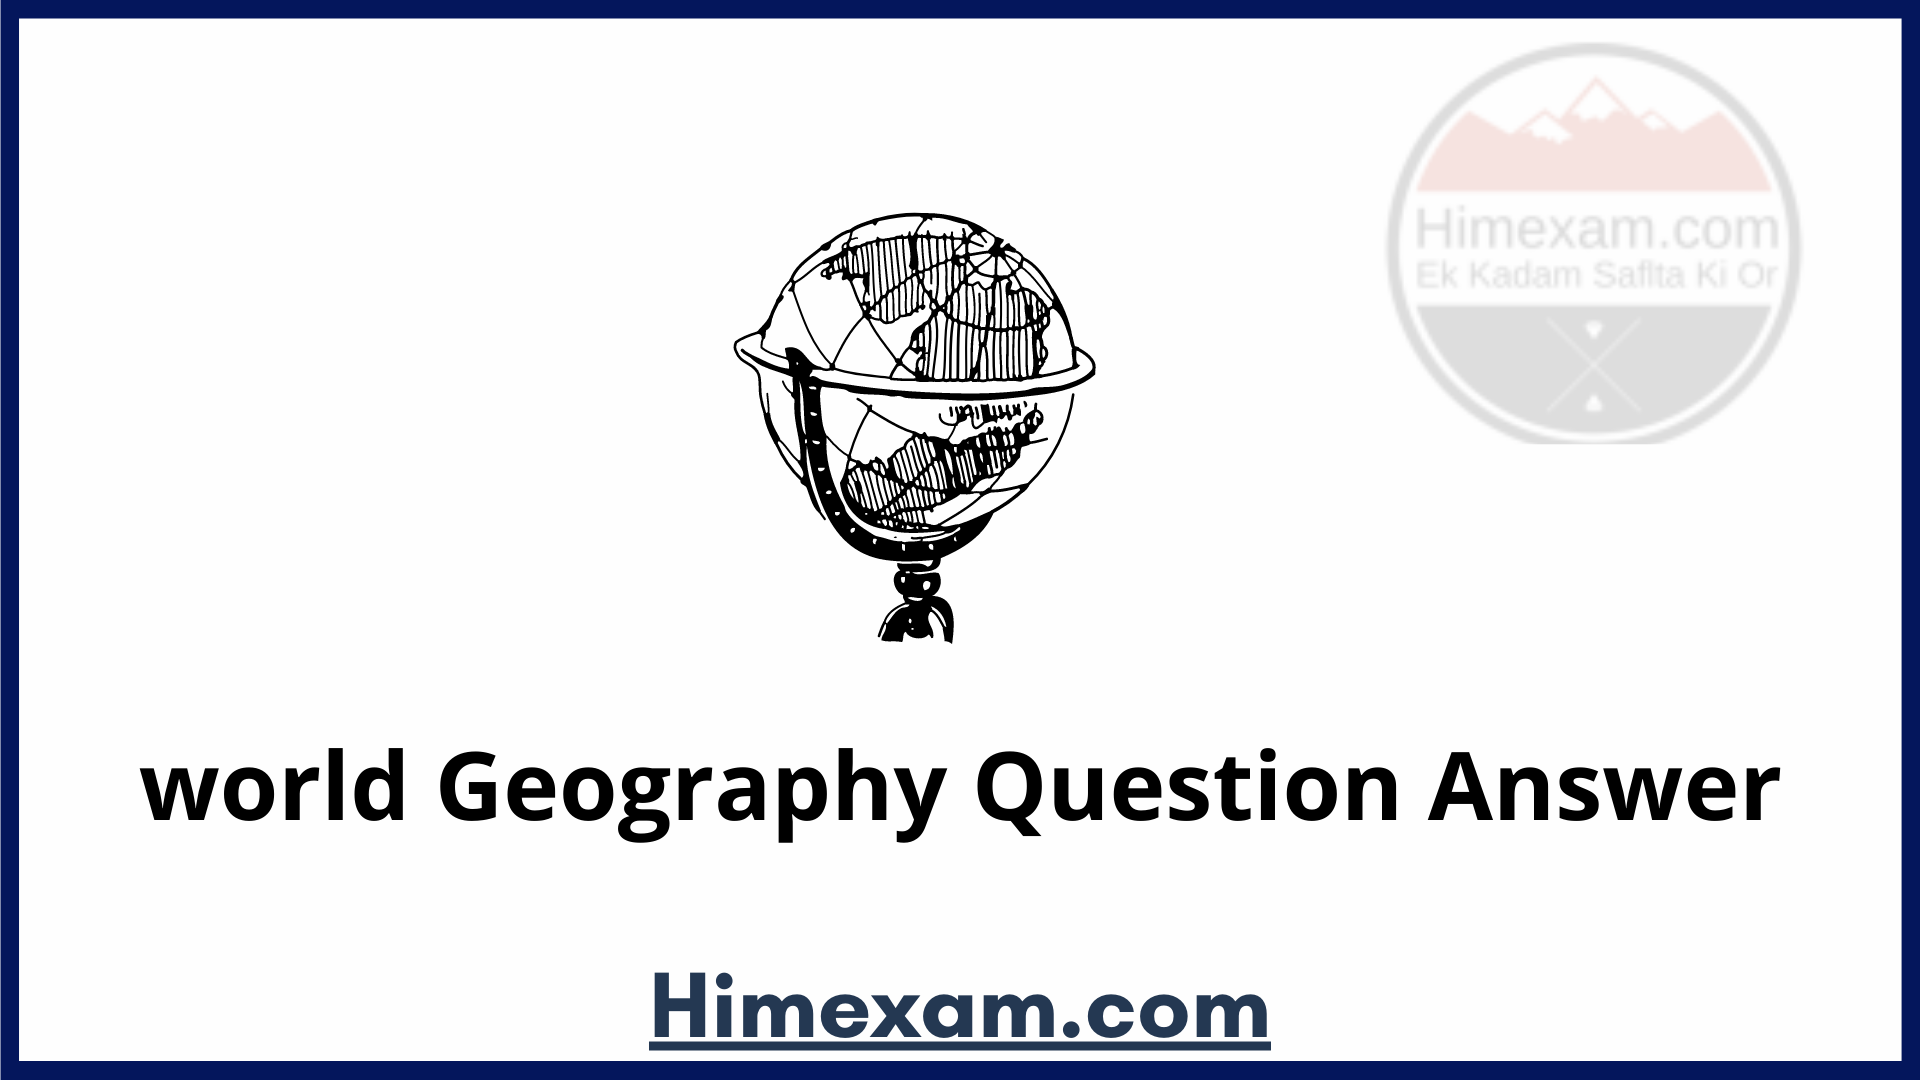 world Geography Question Answer